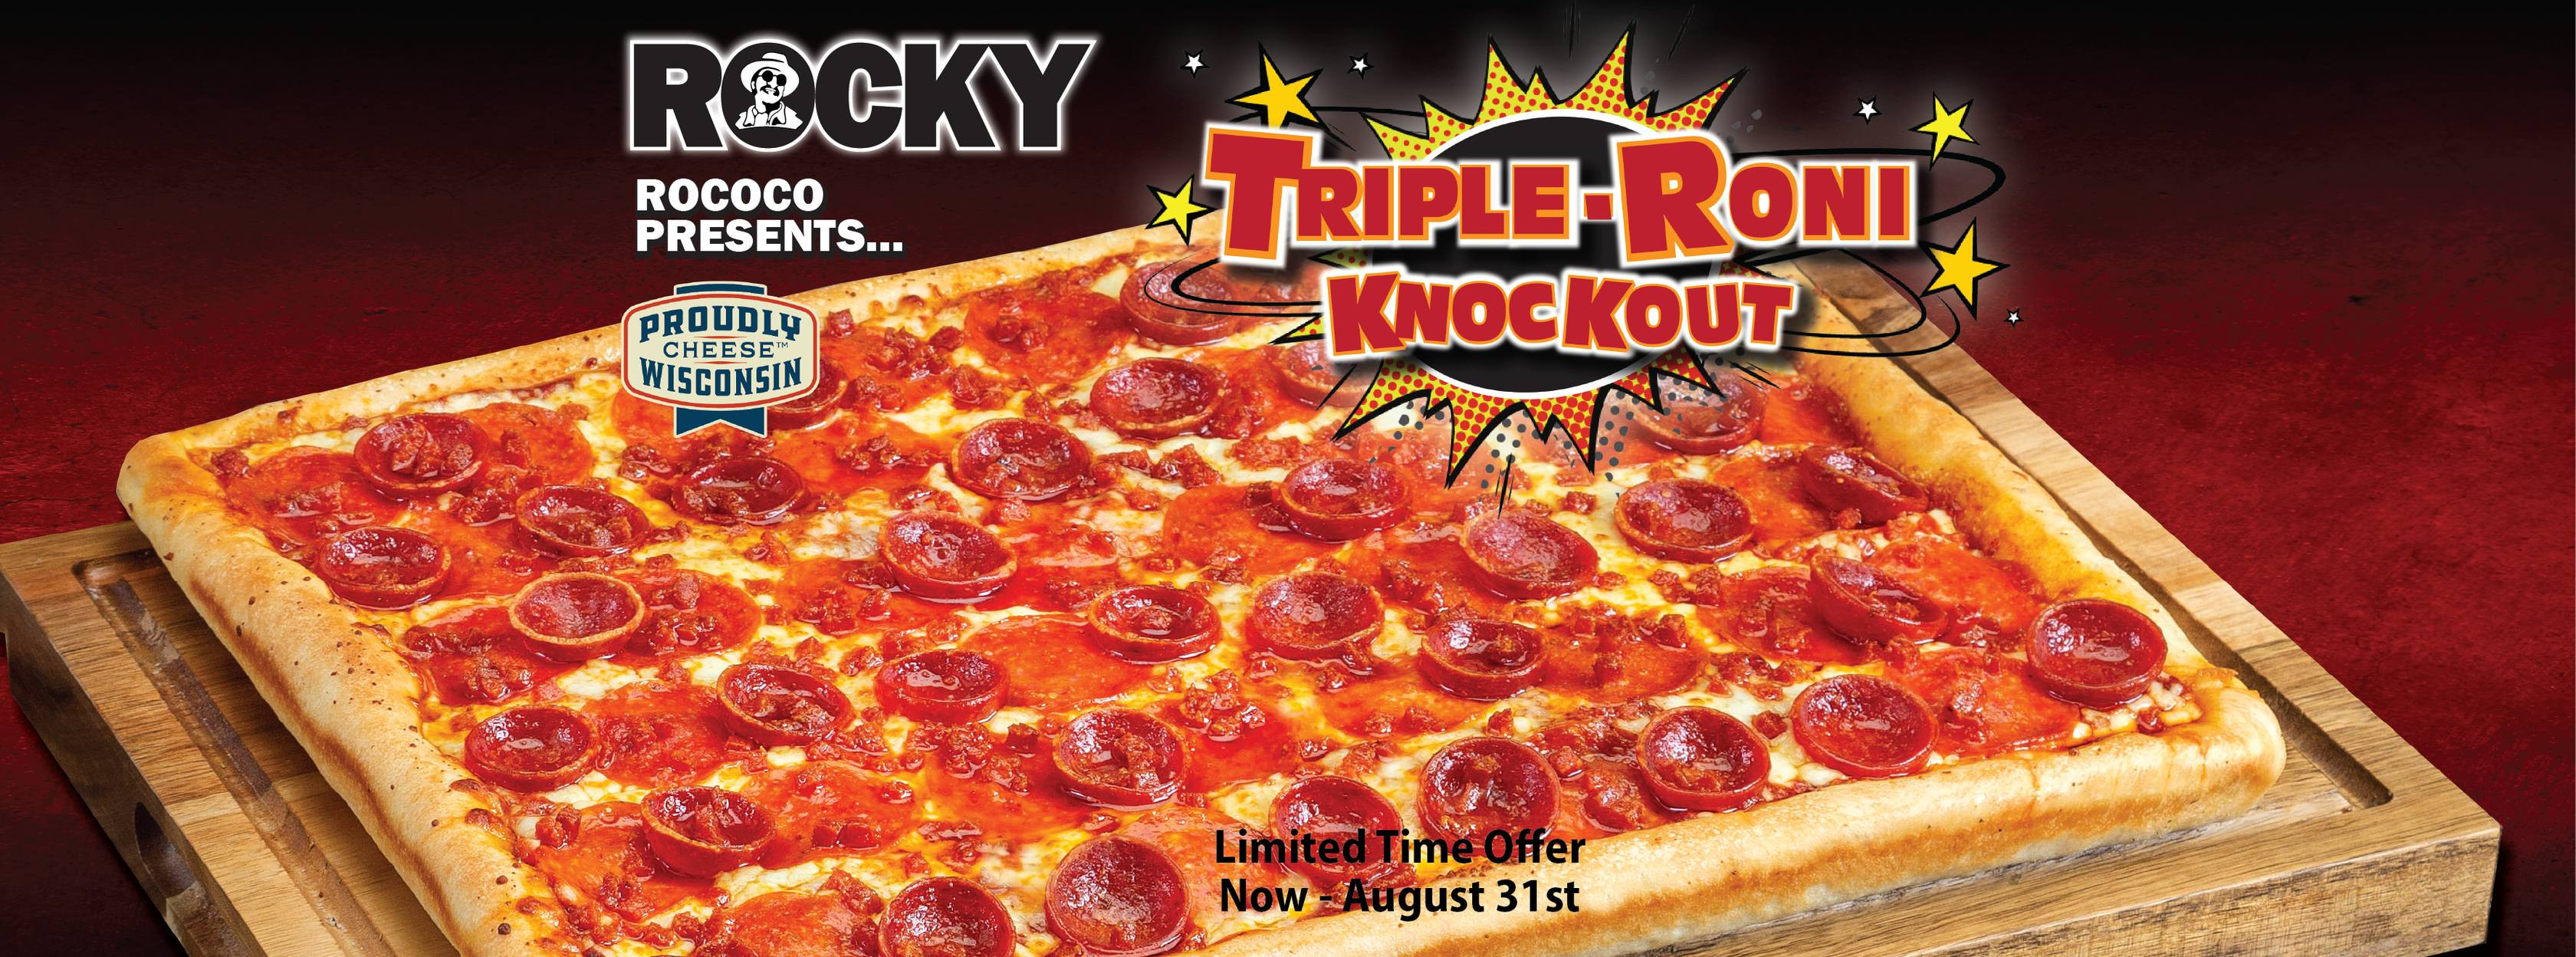 Rocky Rococo Pizza and Pasta 4th of July Get Large Triple-Roni Knockout Pizza for $23.99 Only